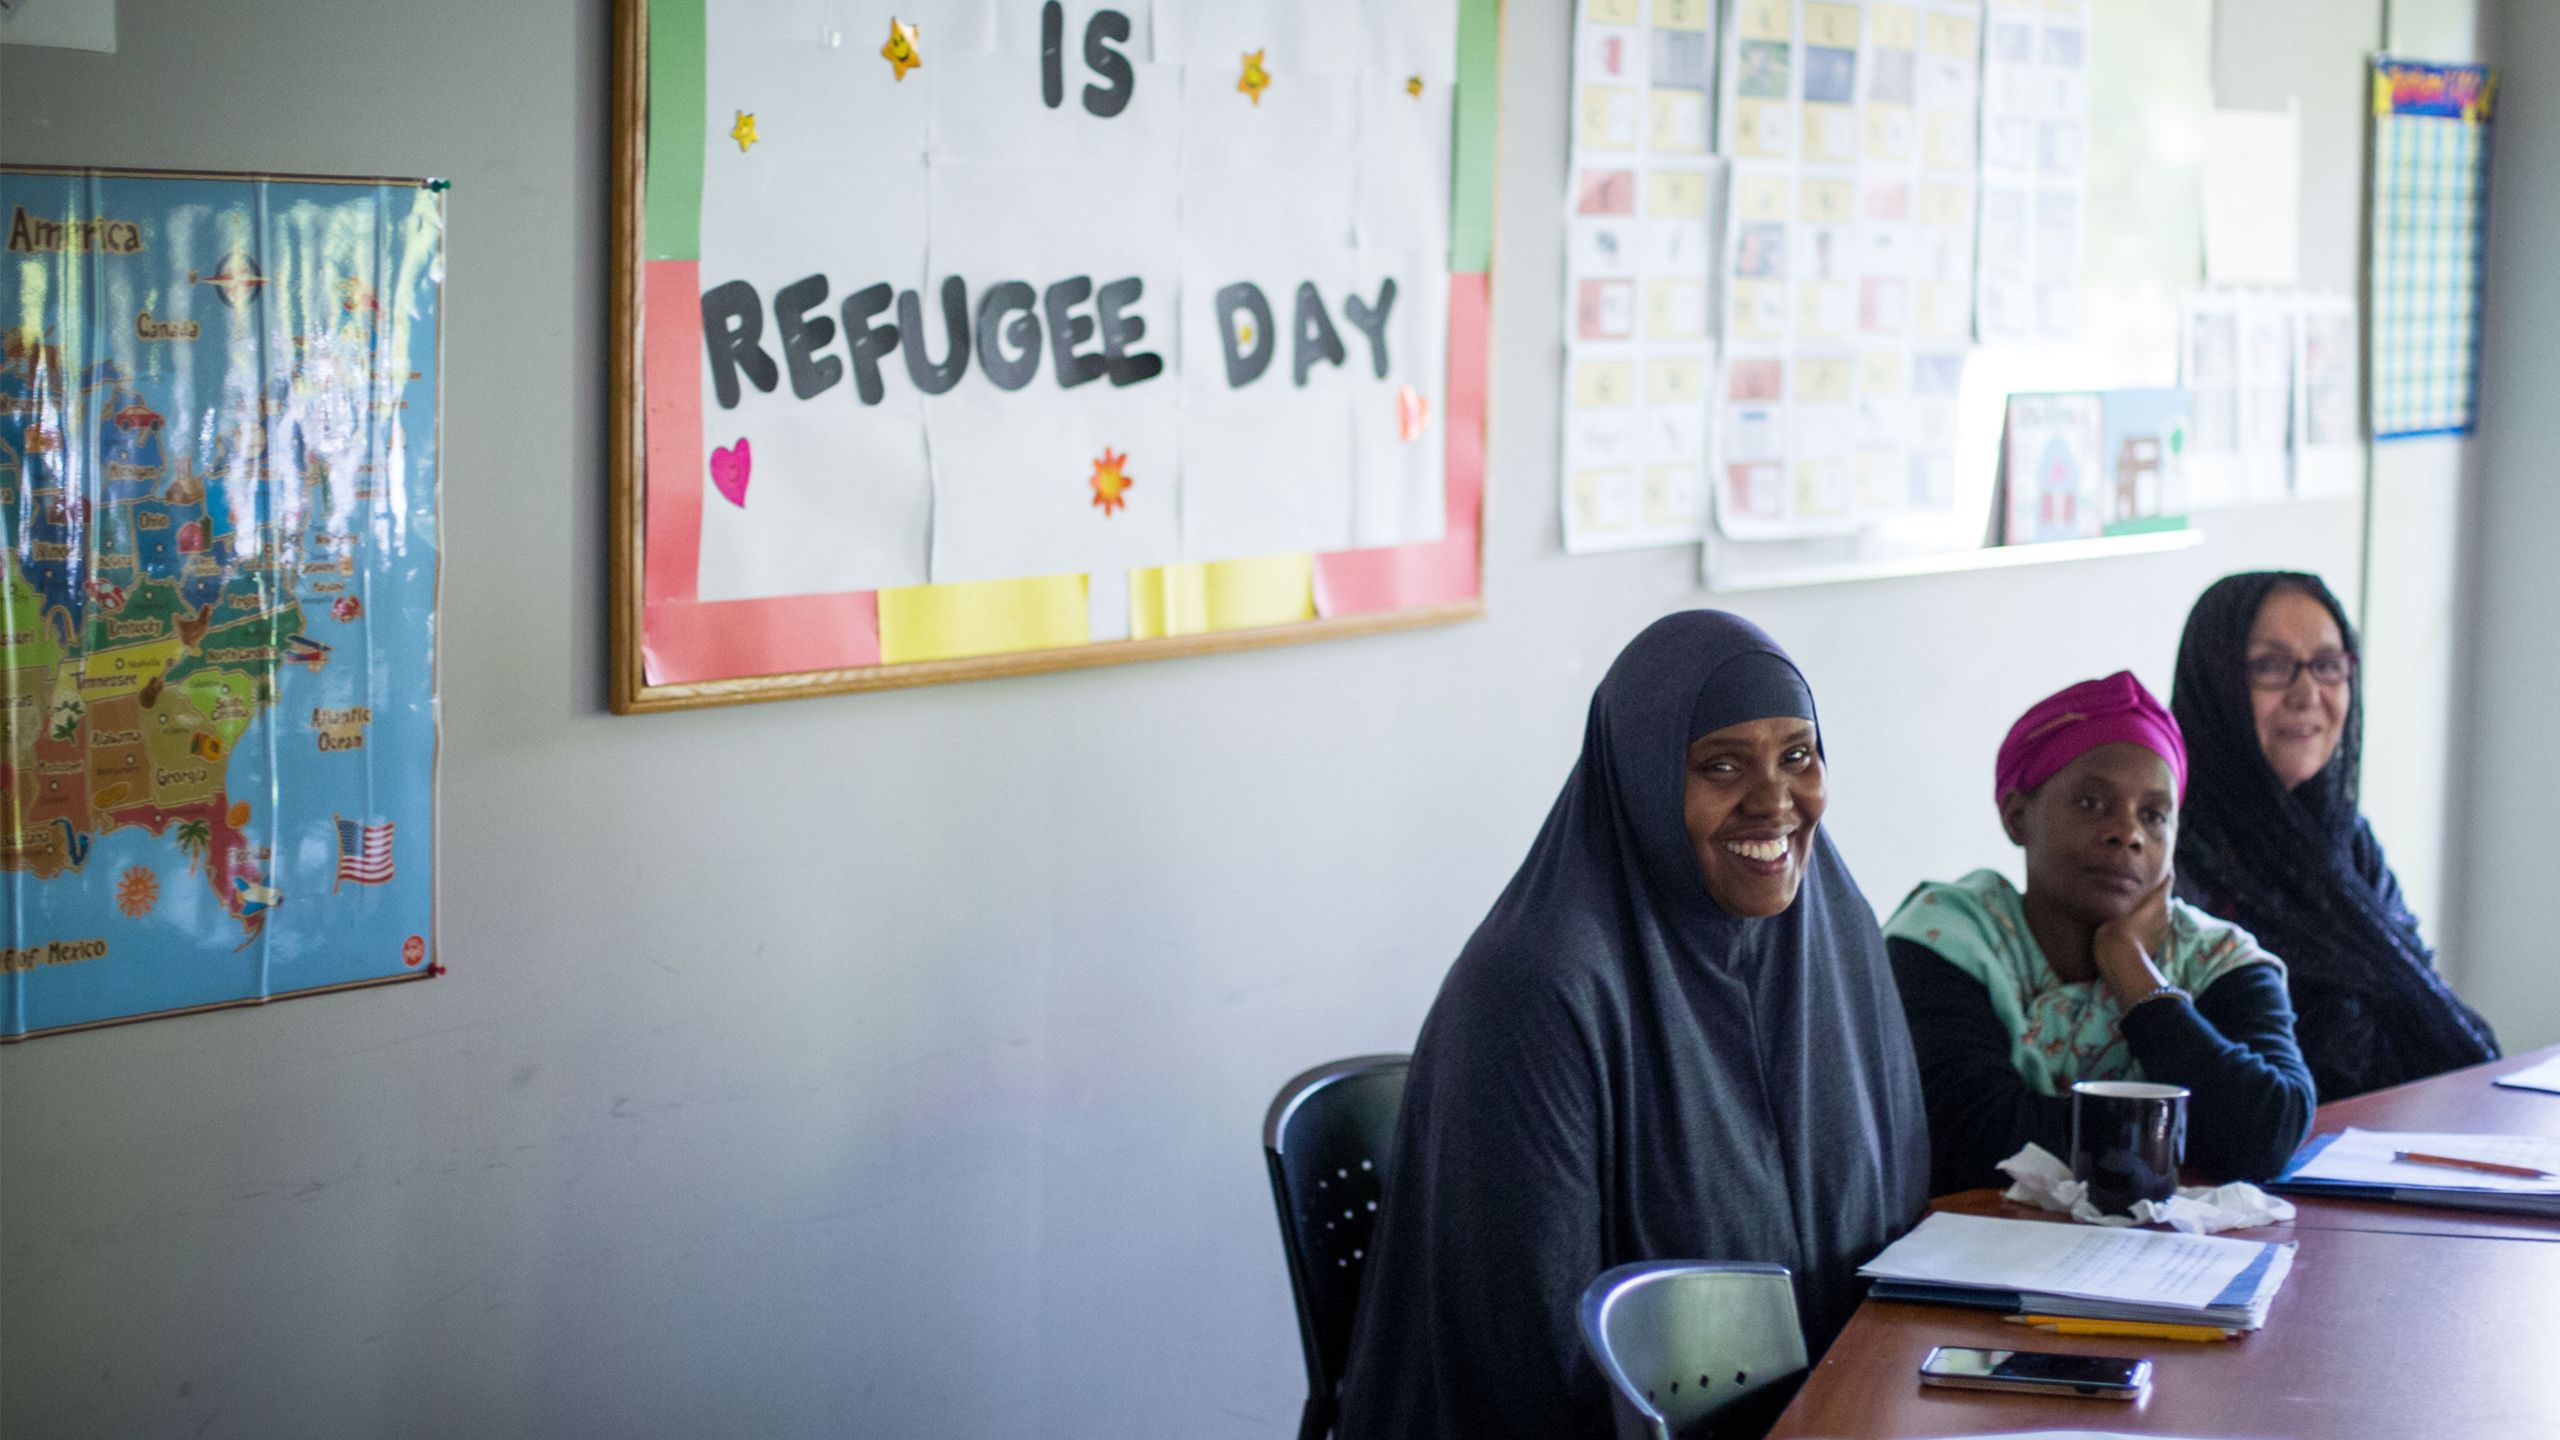 Three women wearing head scarves sit at a table during a class provided by the International Rescue Committee.